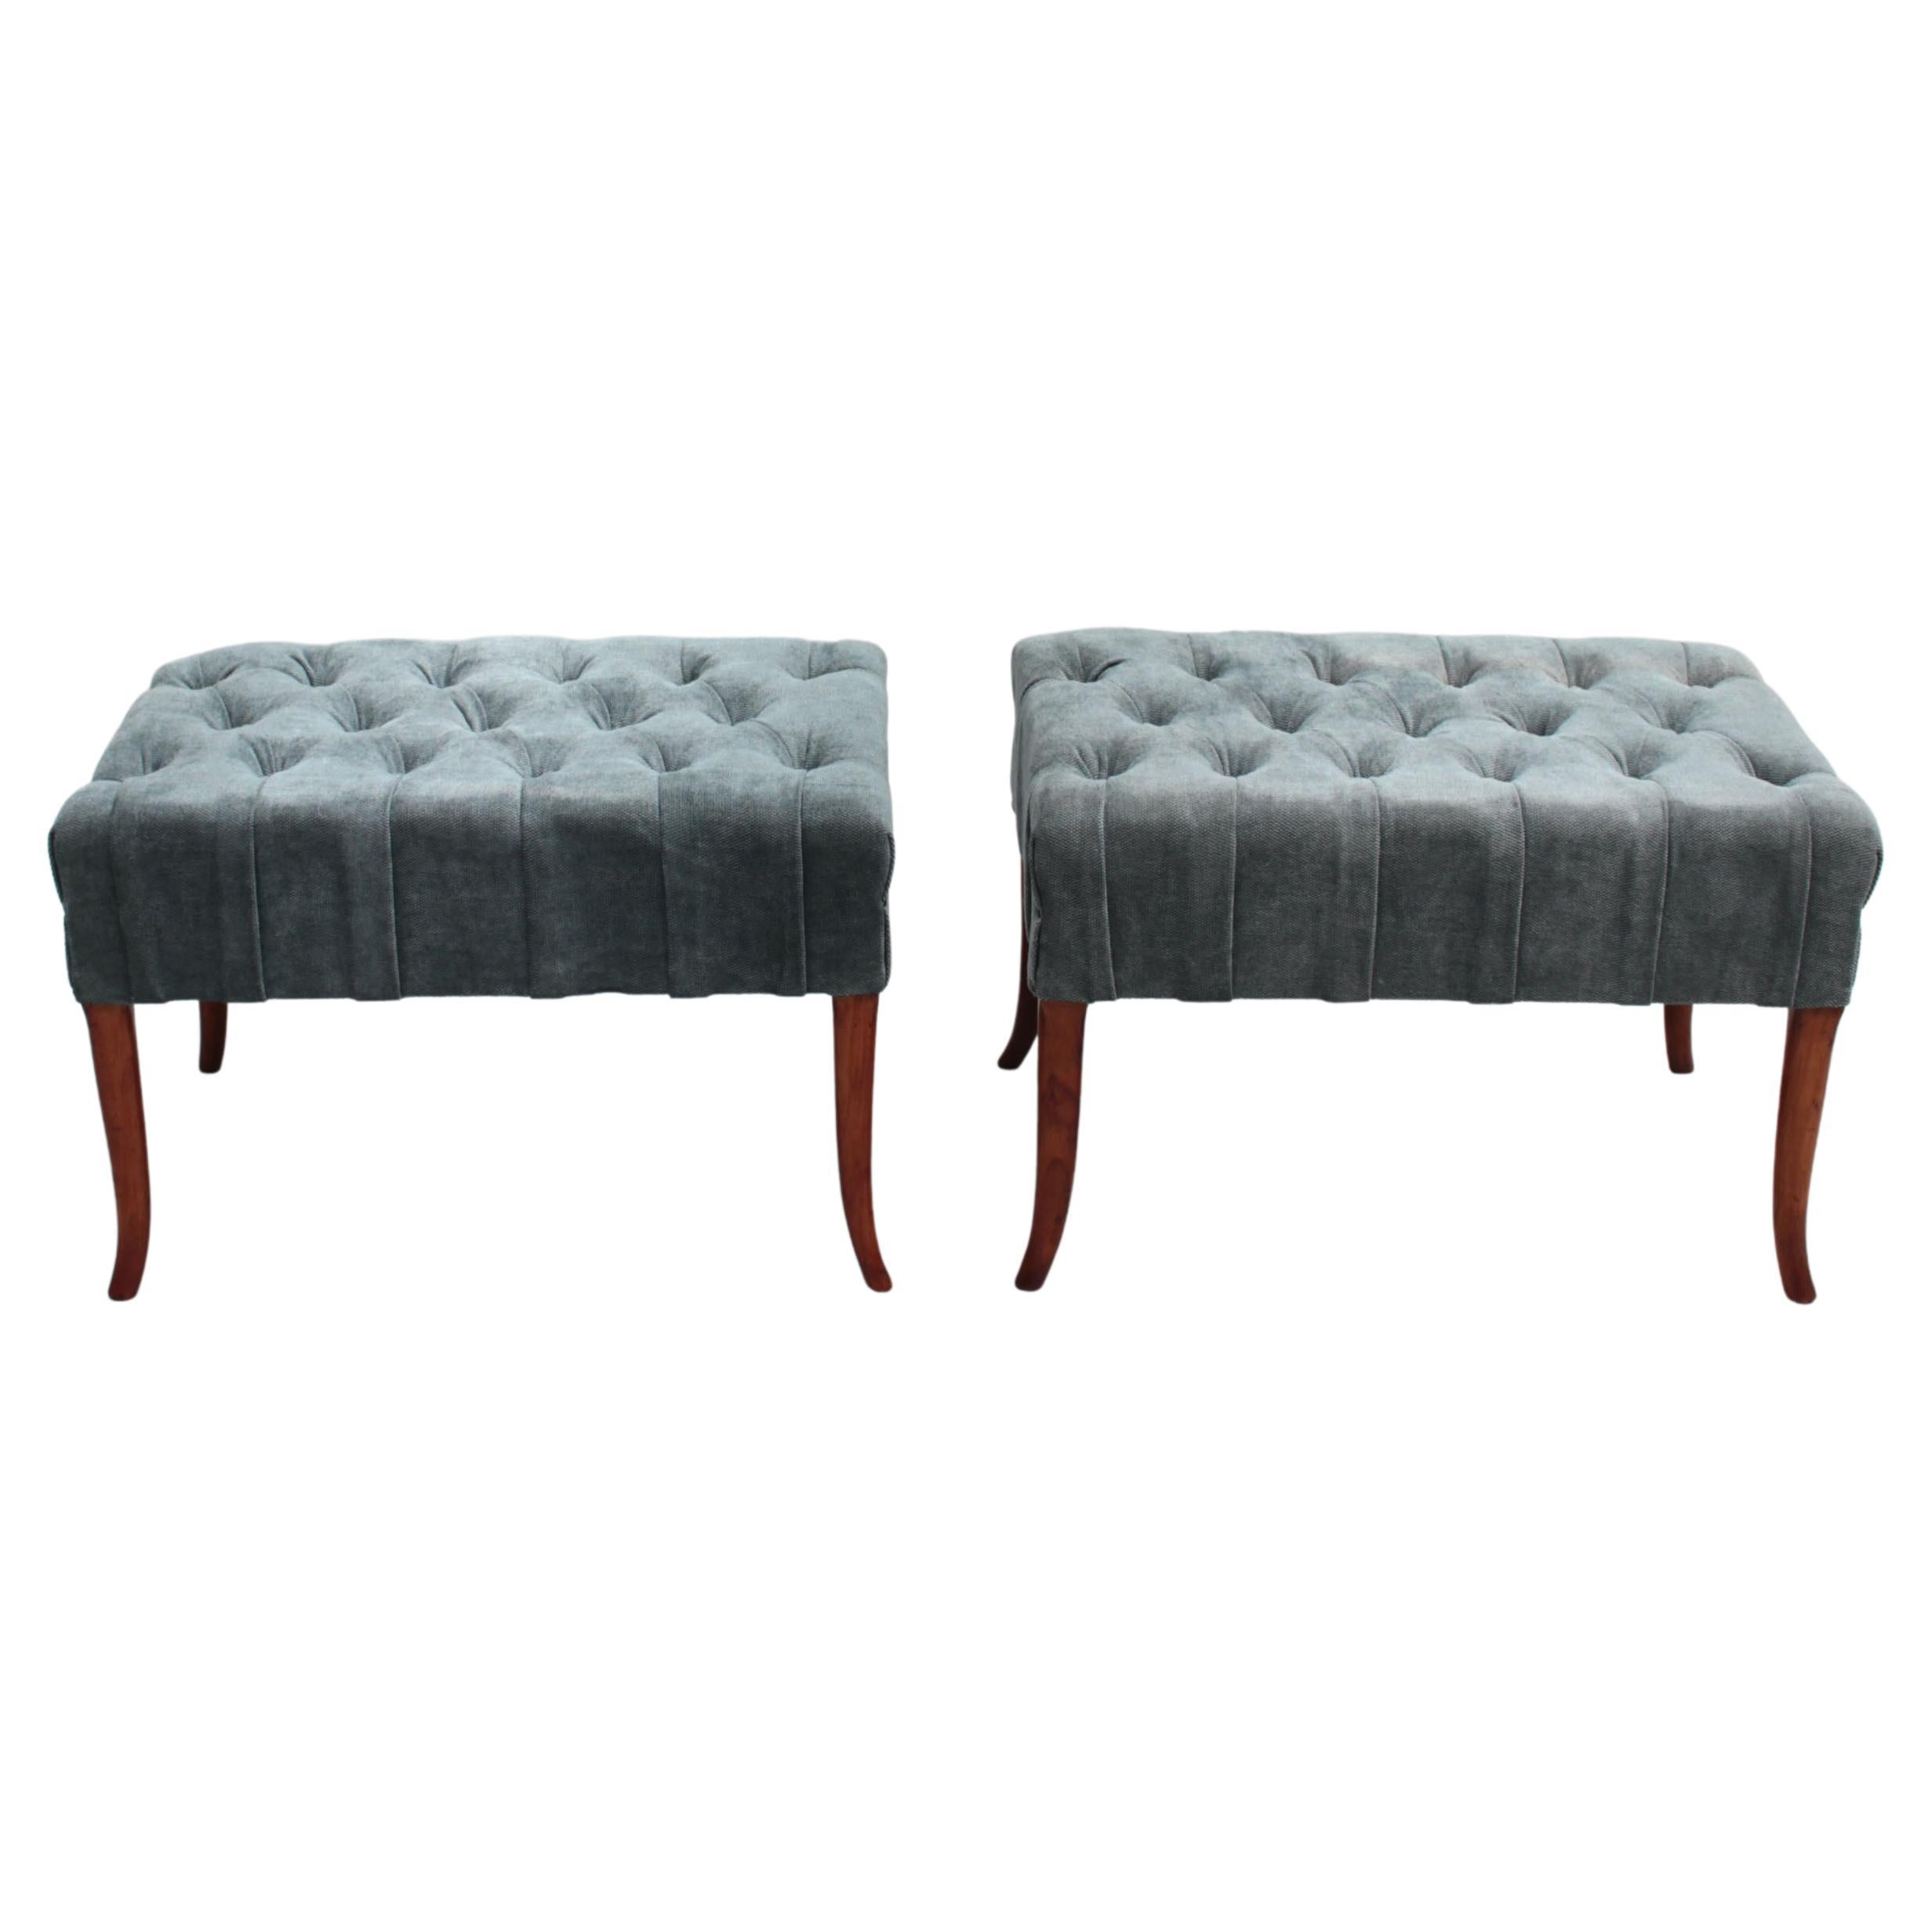 Pair of Italian Mid-Century Chesterfield Pouffes For Sale